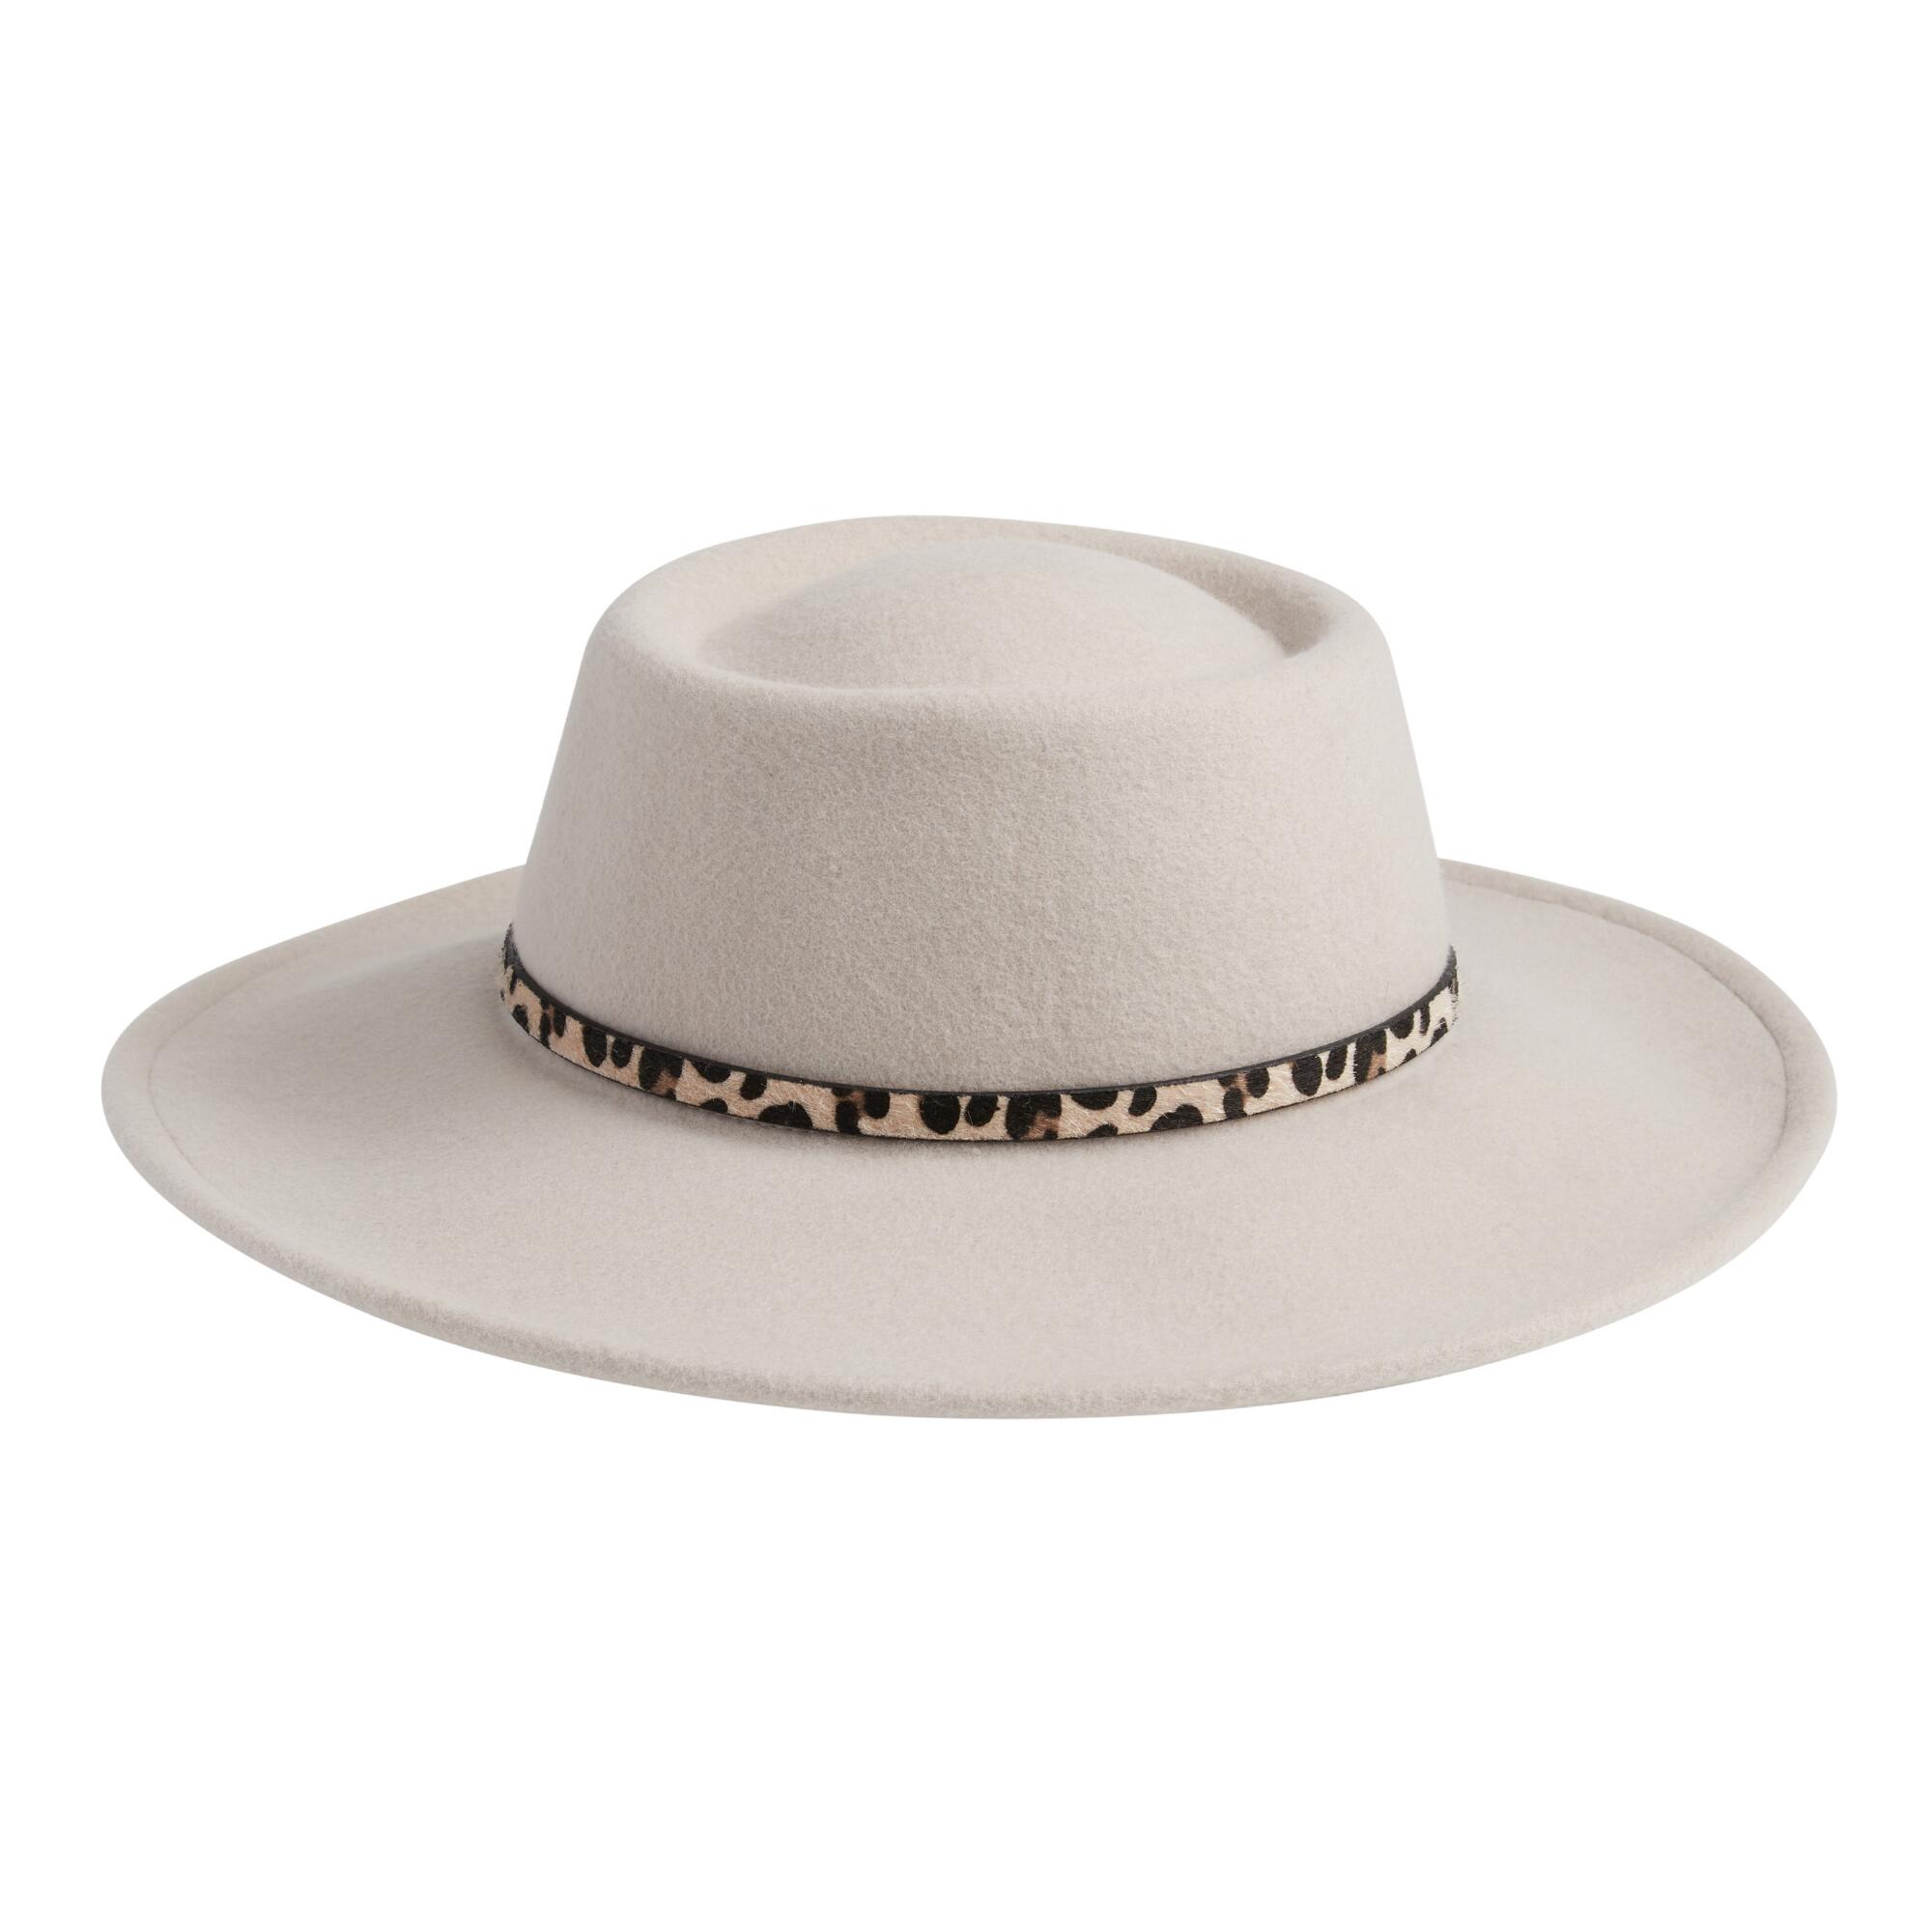 White Wool Flat Top Hat With Cheetah Trim by World Market